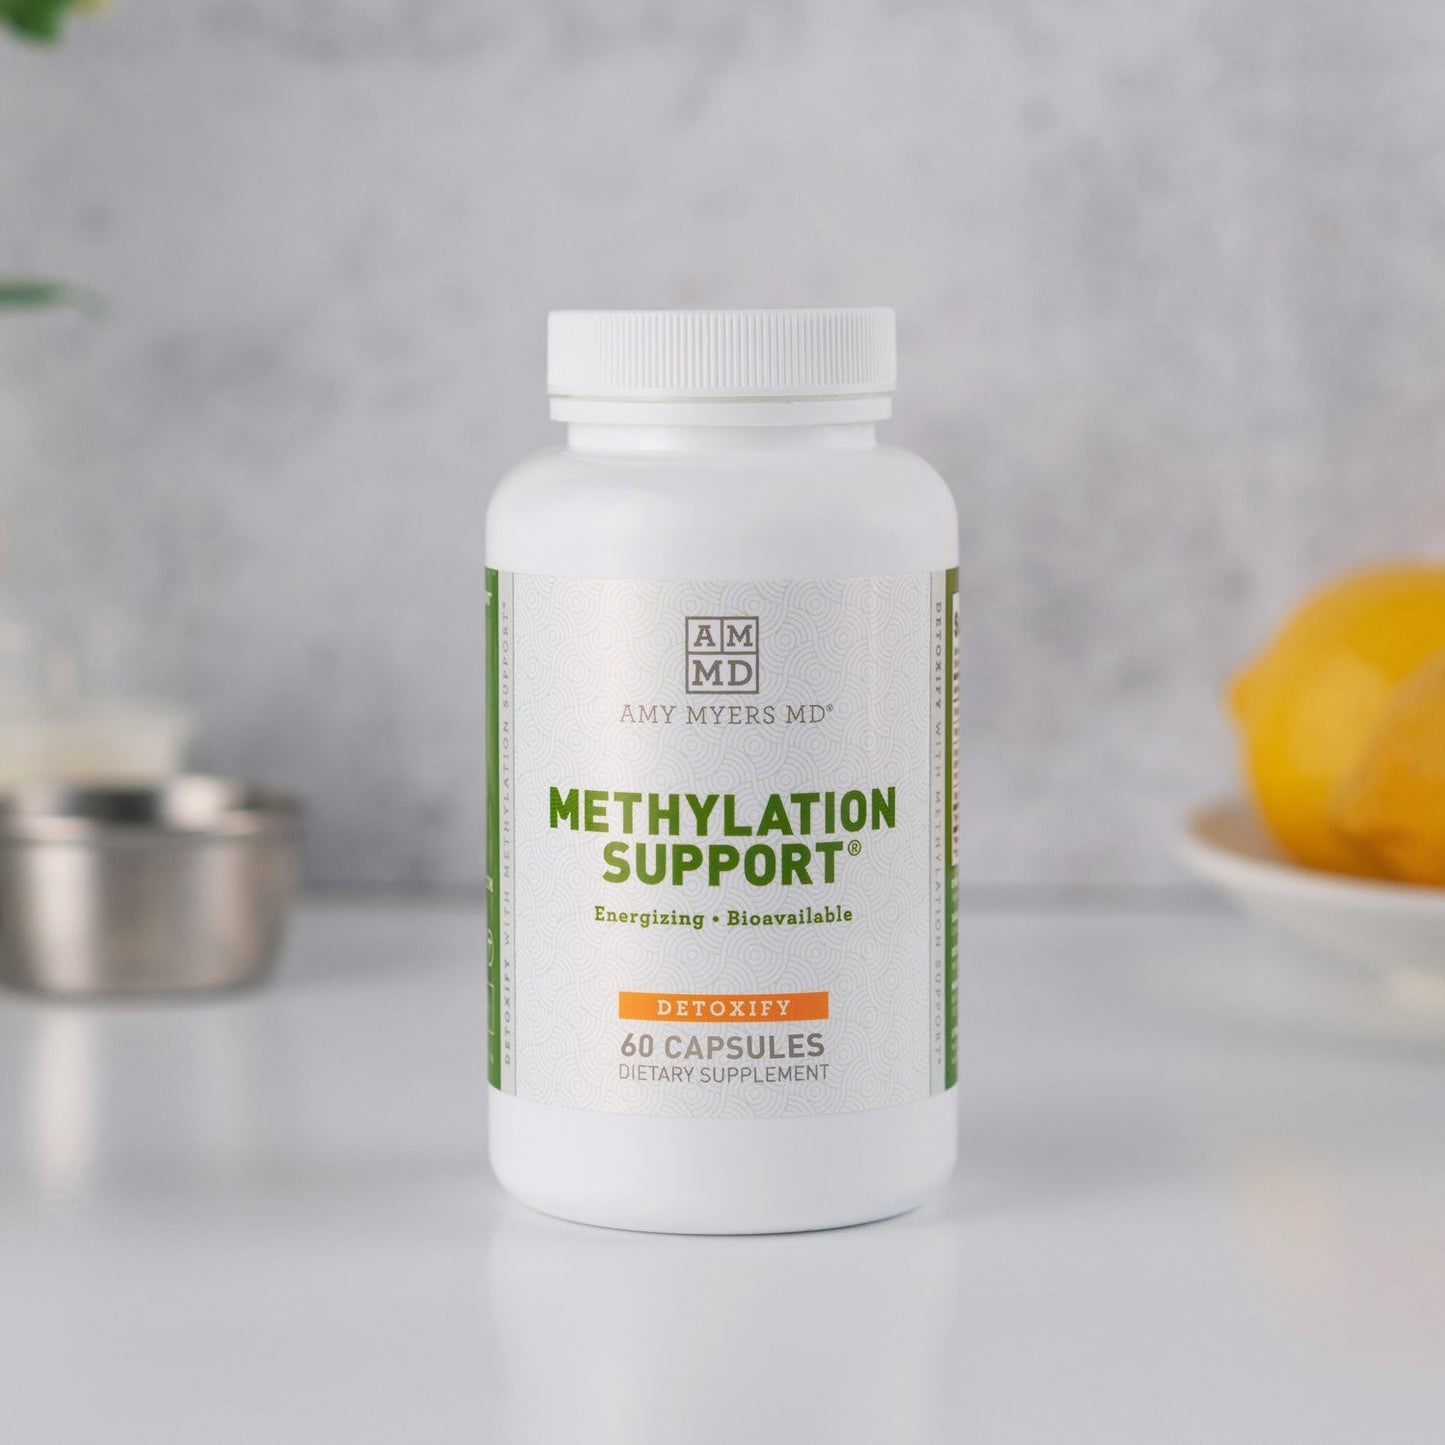 Methylation Support® by Amy Myers MD